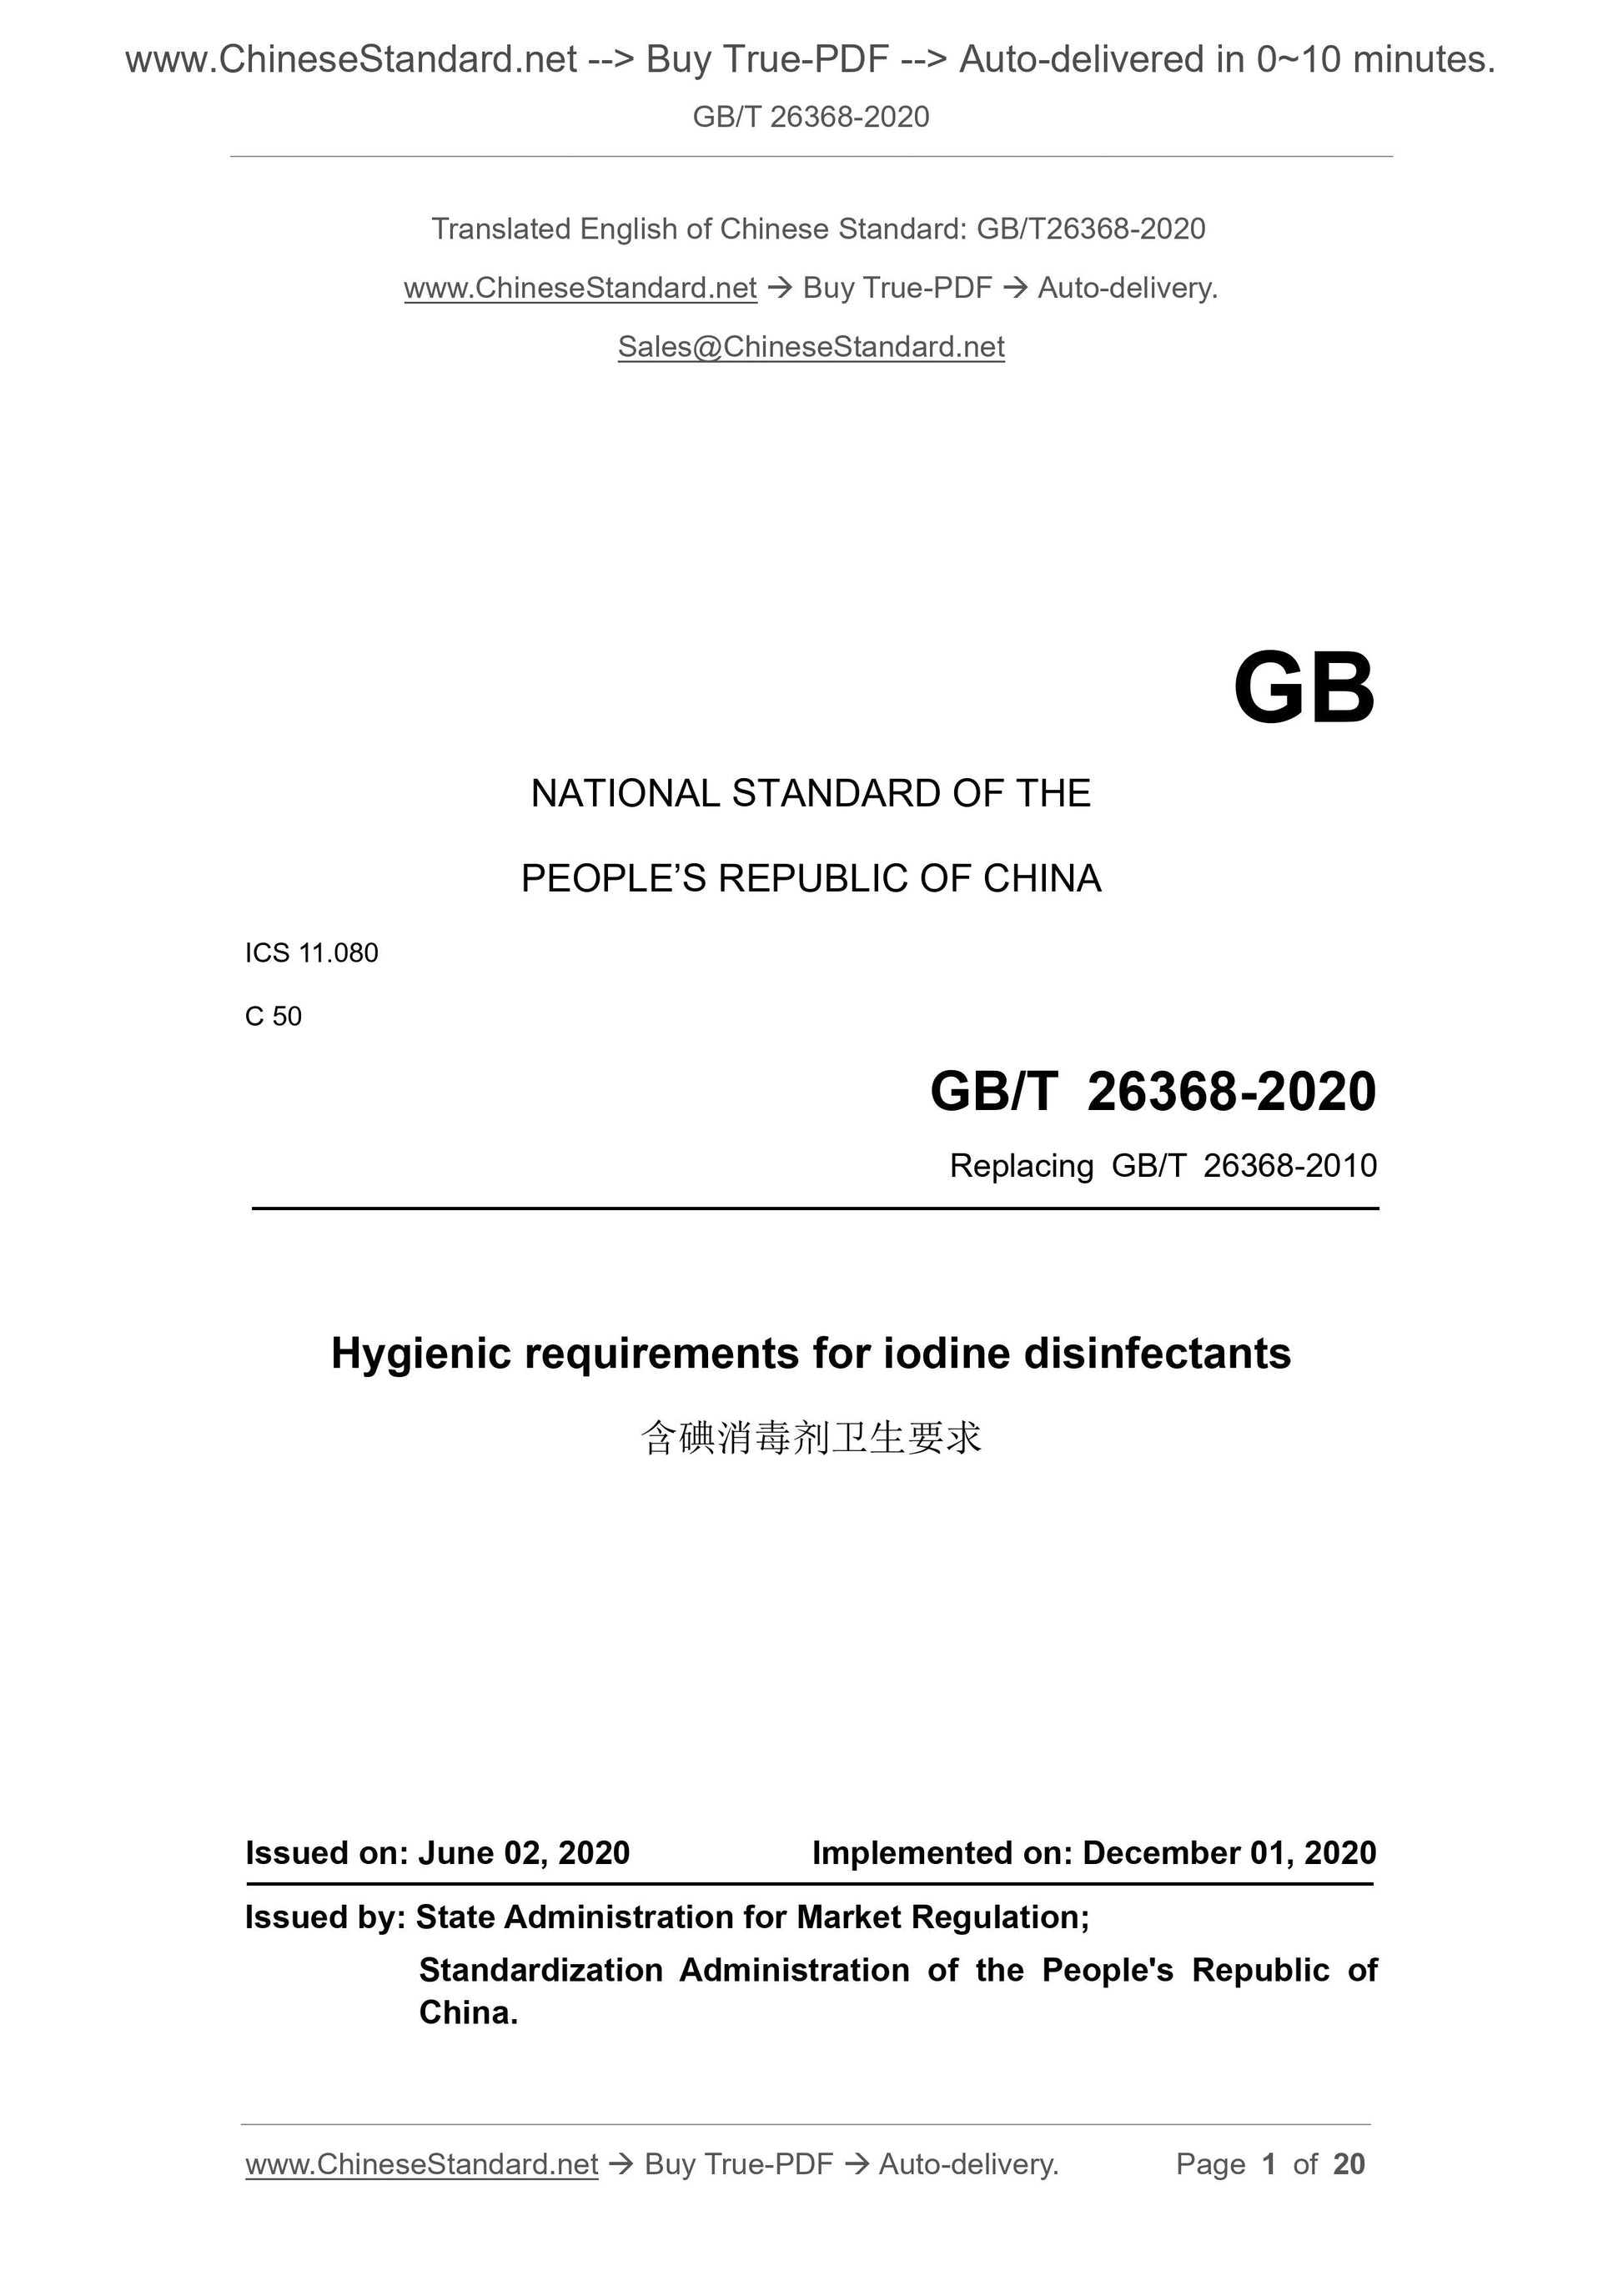 GB/T 26368-2020 Page 1